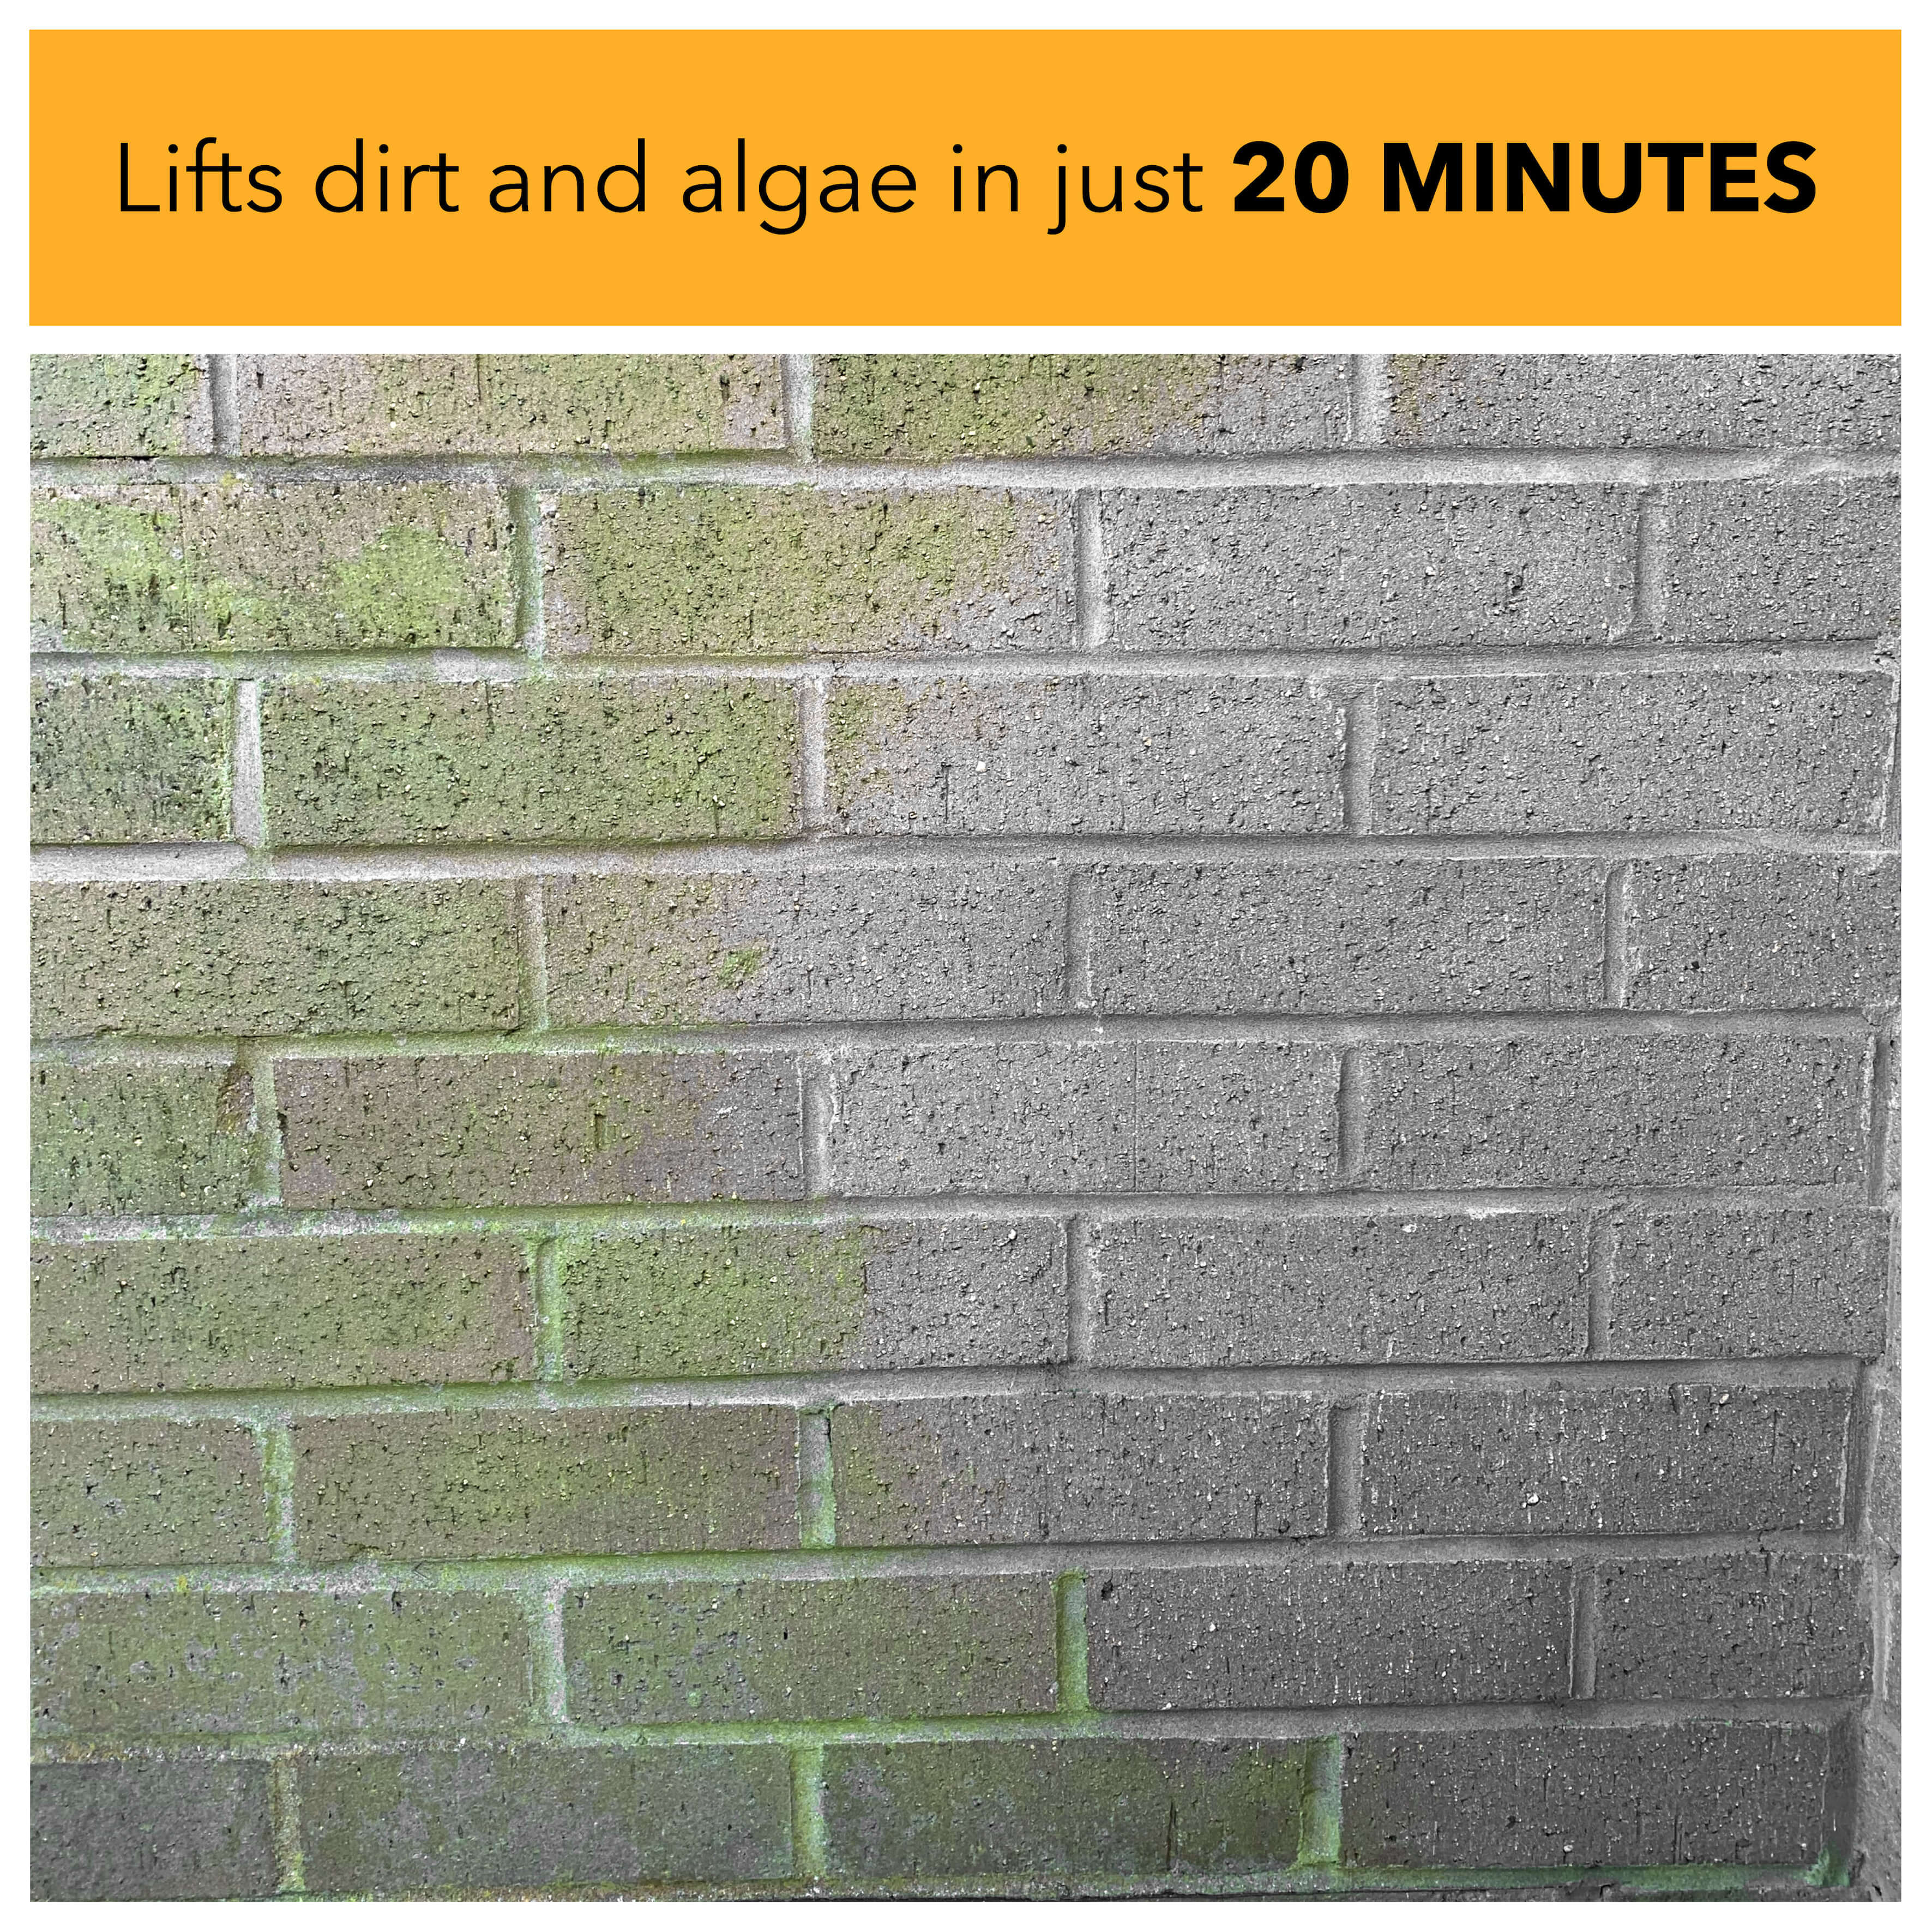 Lifts dirt and algae in just 20 minutes